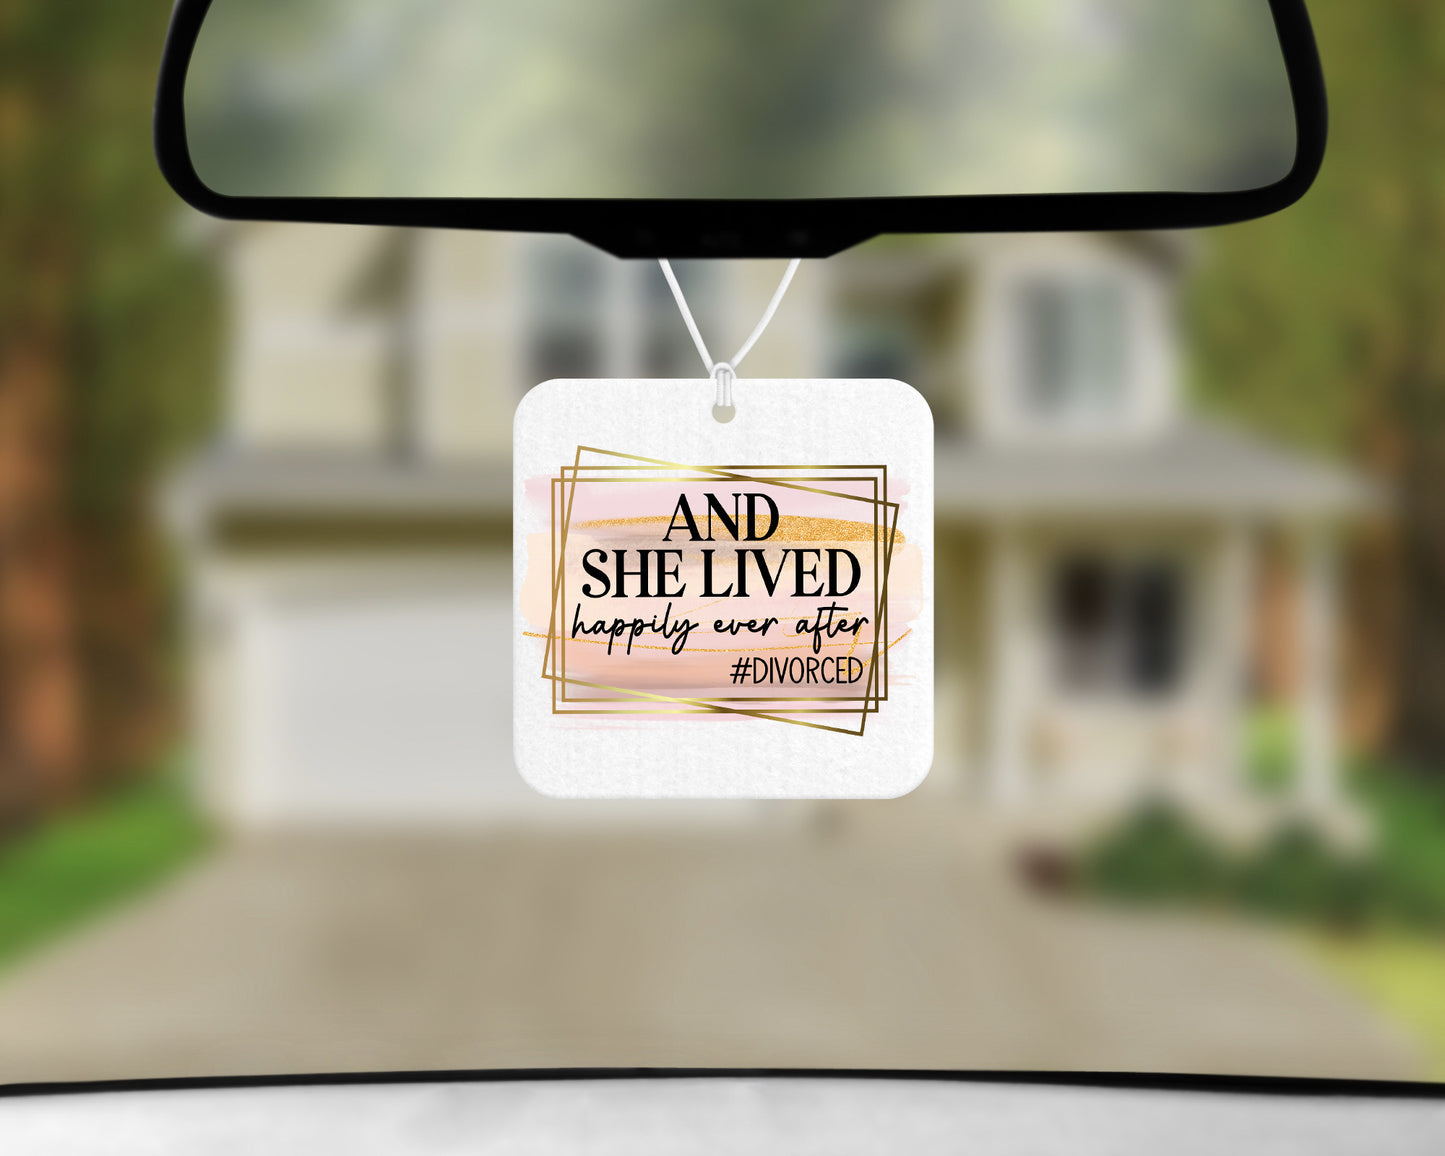 Car Fresheners- Happily Ever After #Divorced